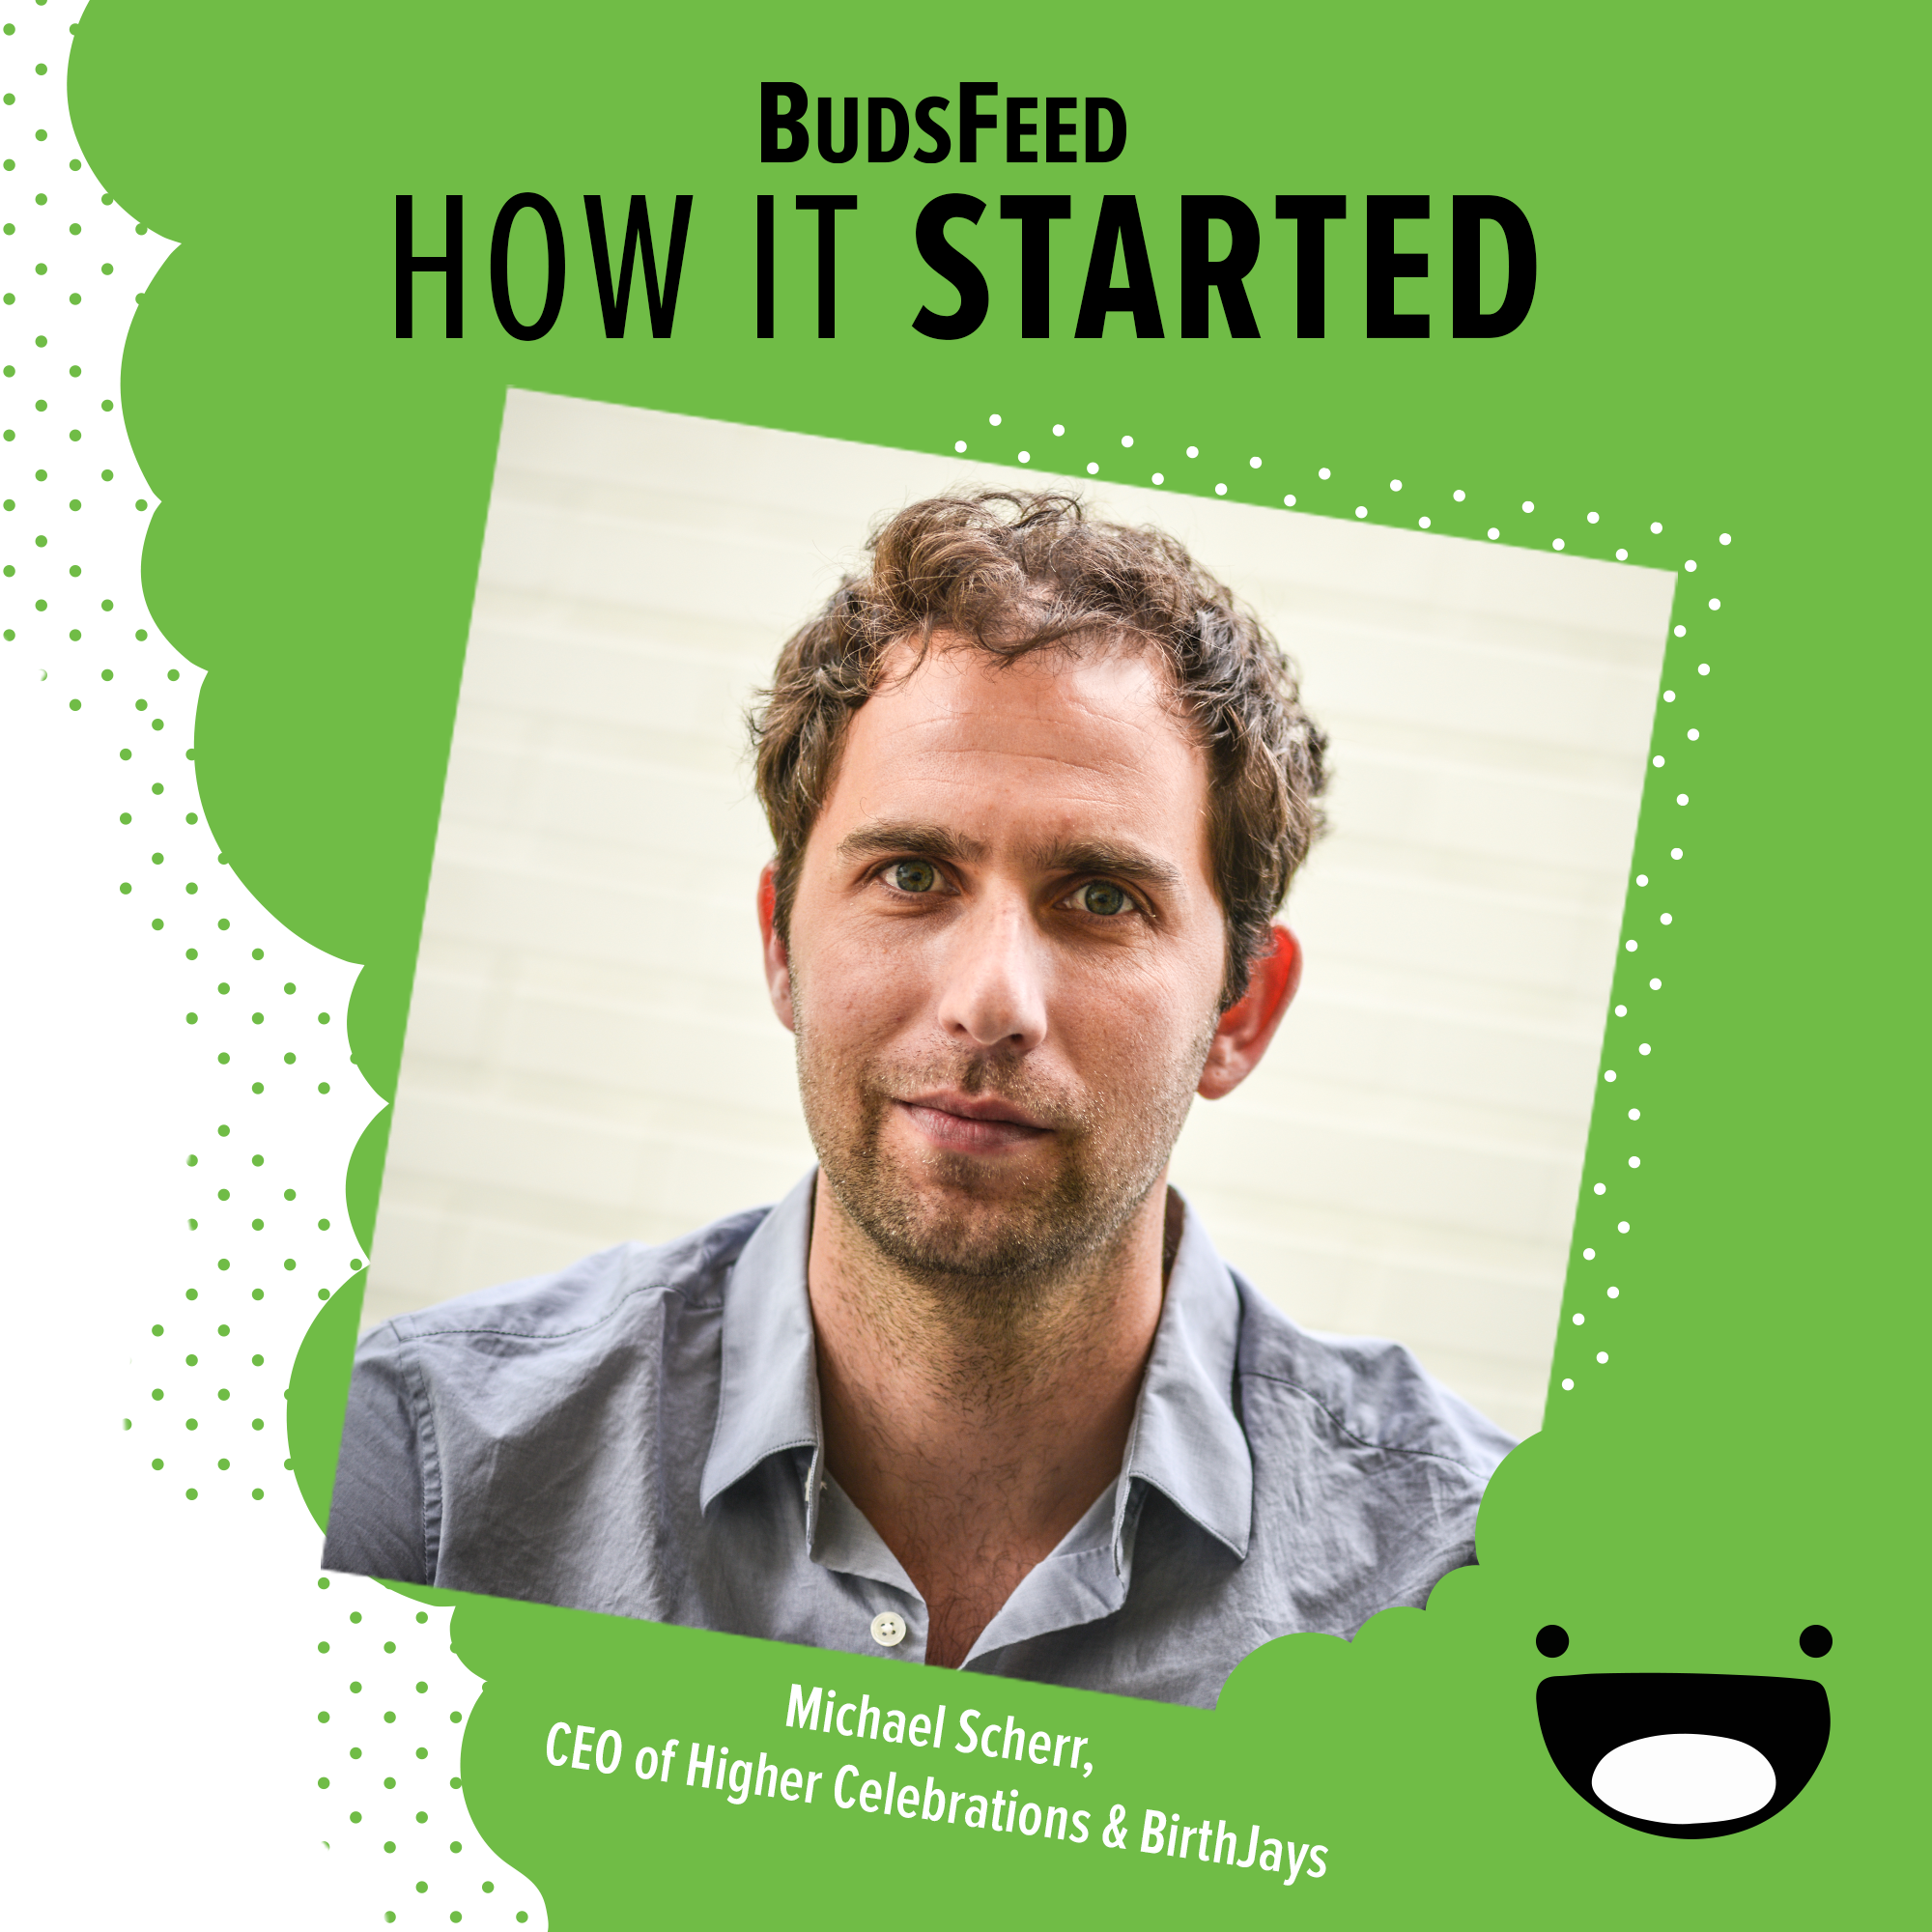 BUDSFEED - HOW IT STARTED